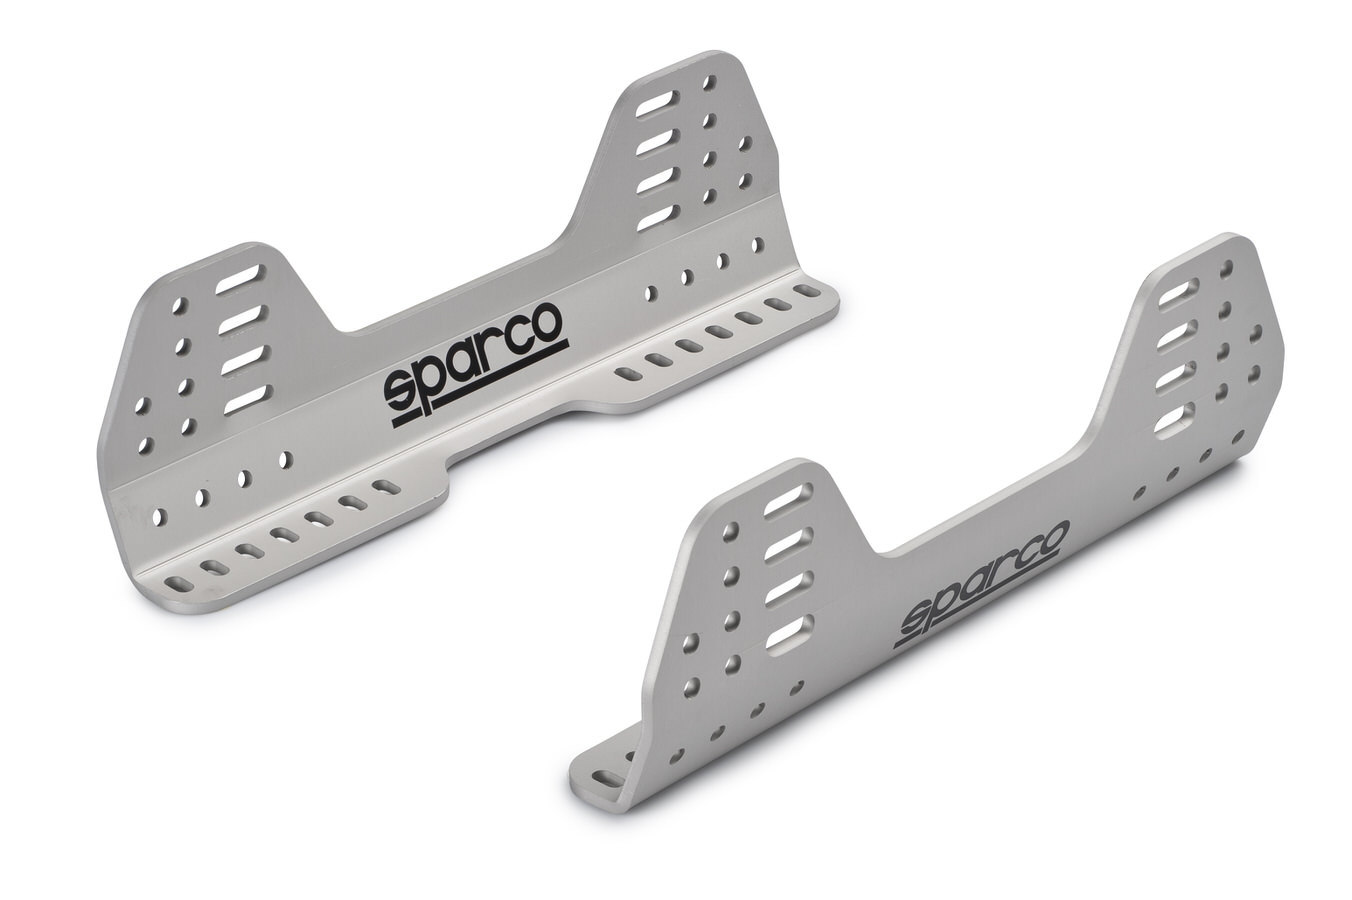 Sparco 004903 - Seat Mount, Side Mount, Mounting Hardware Included, Silver Anodized, Pair